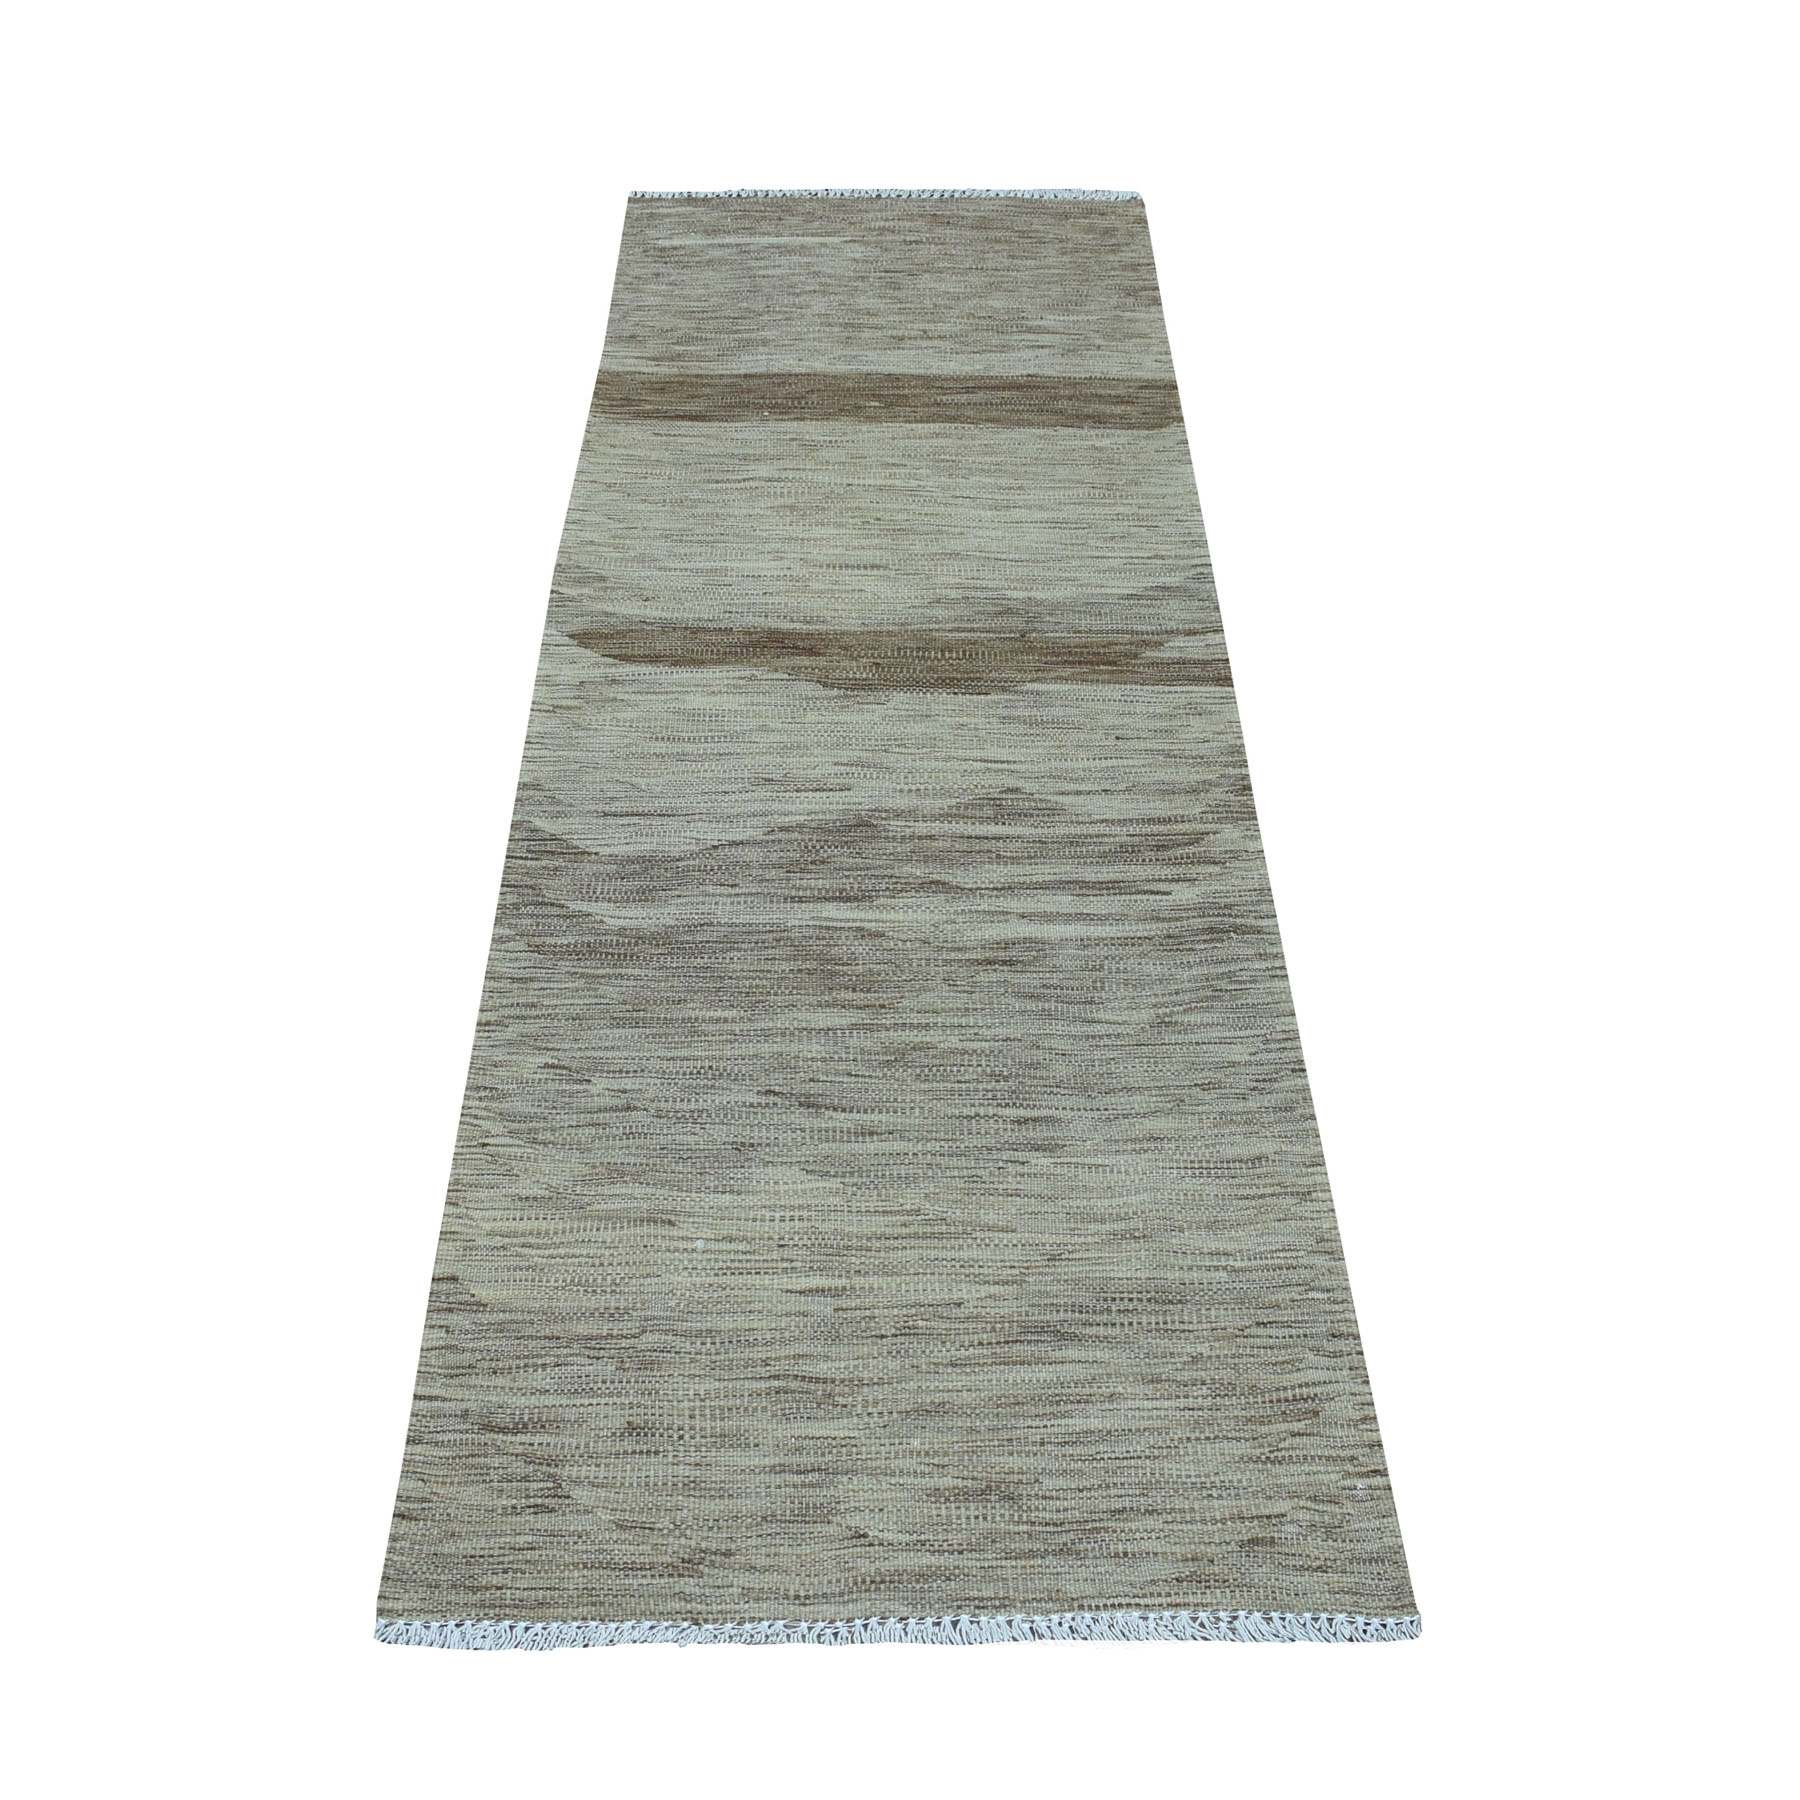 Modern & Contemporary Wool Hand-Woven Area Rug 2'3